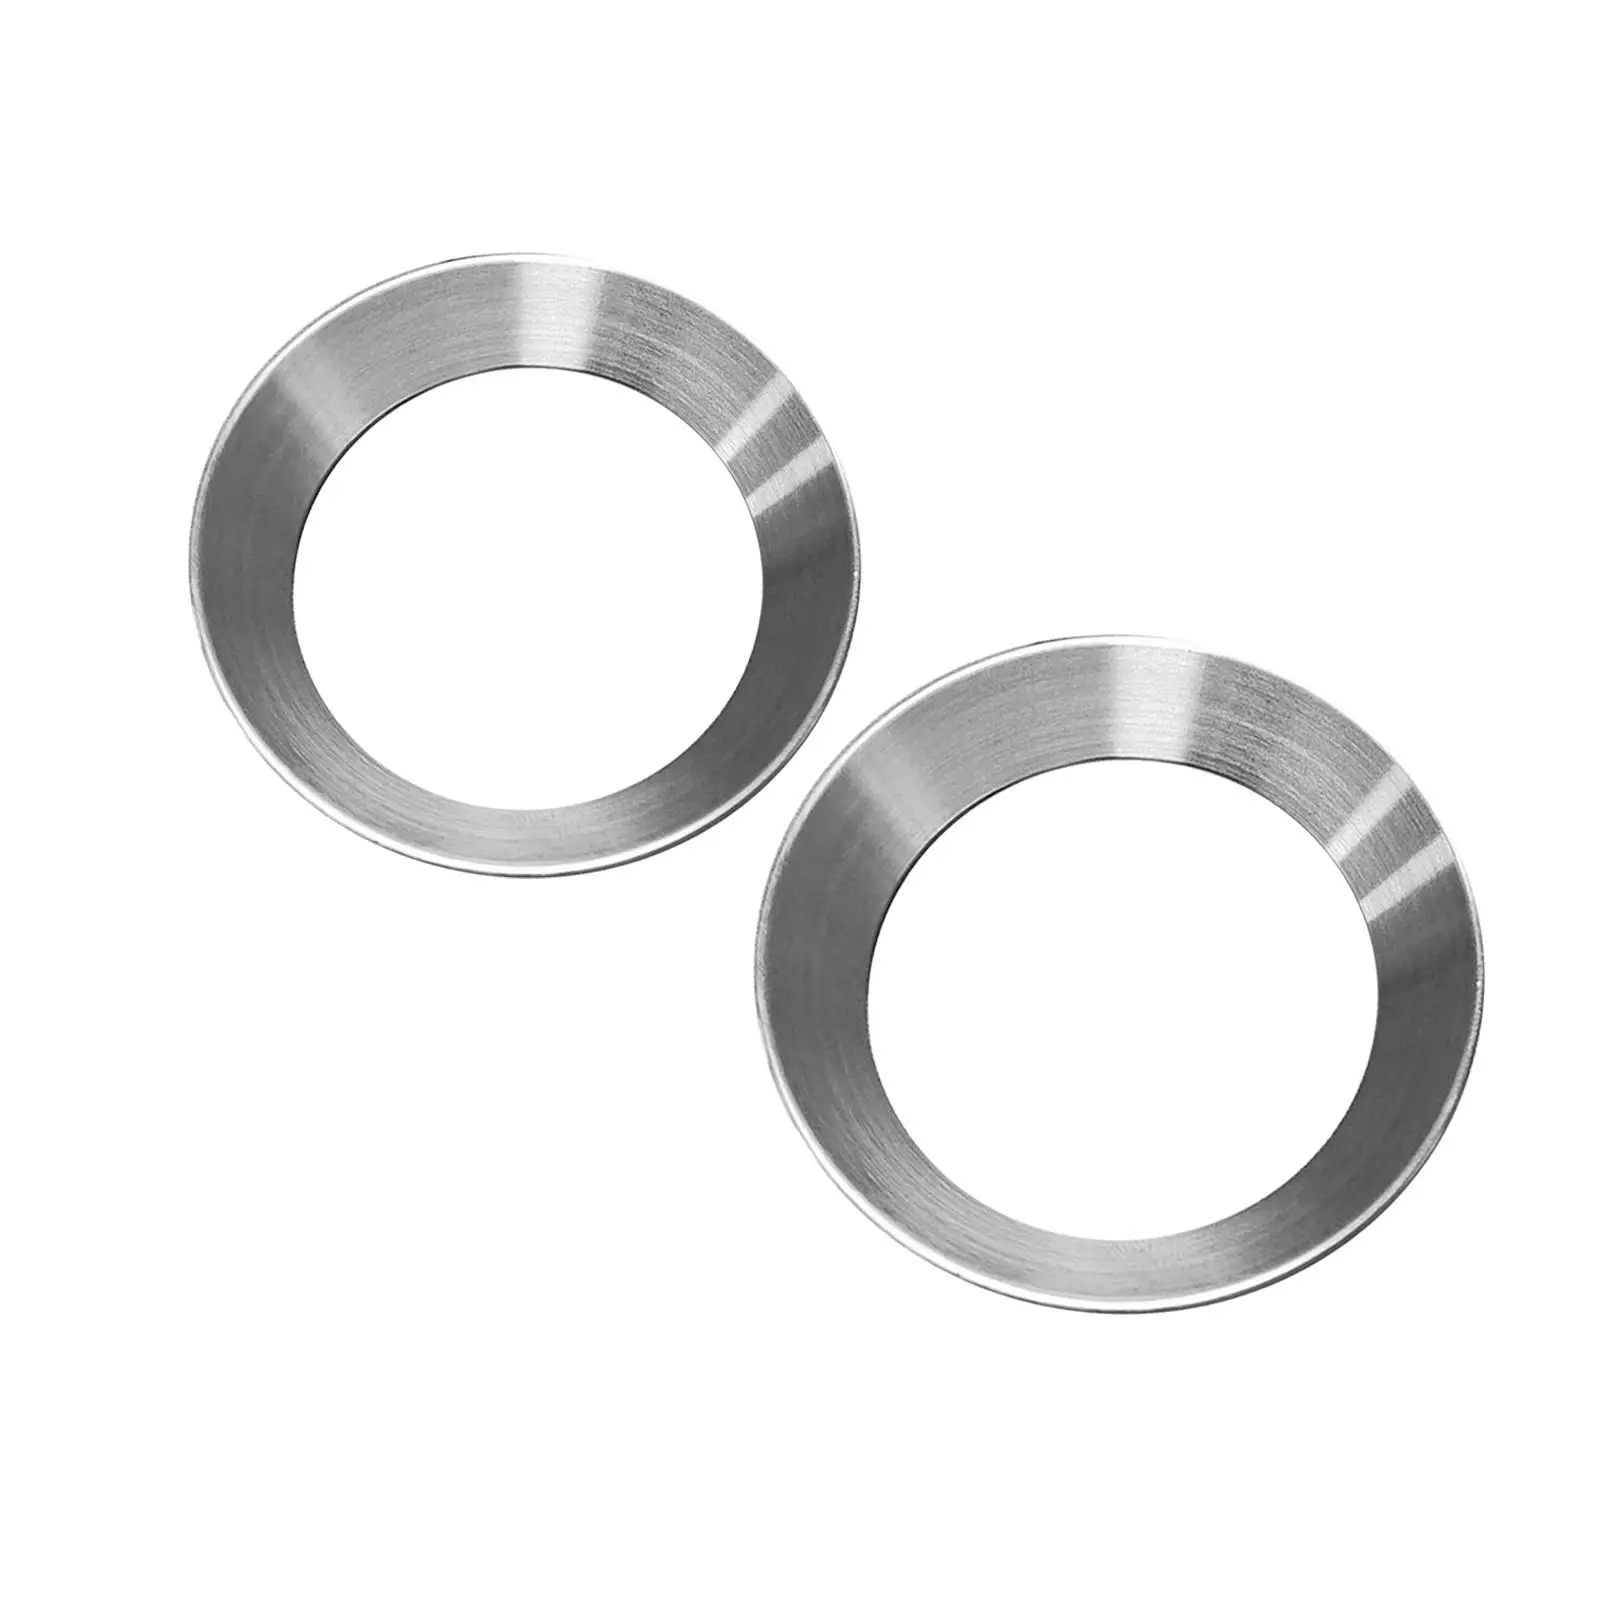 Coffee Dosing Rings Universal Pressing Part Practical for Barista Tool